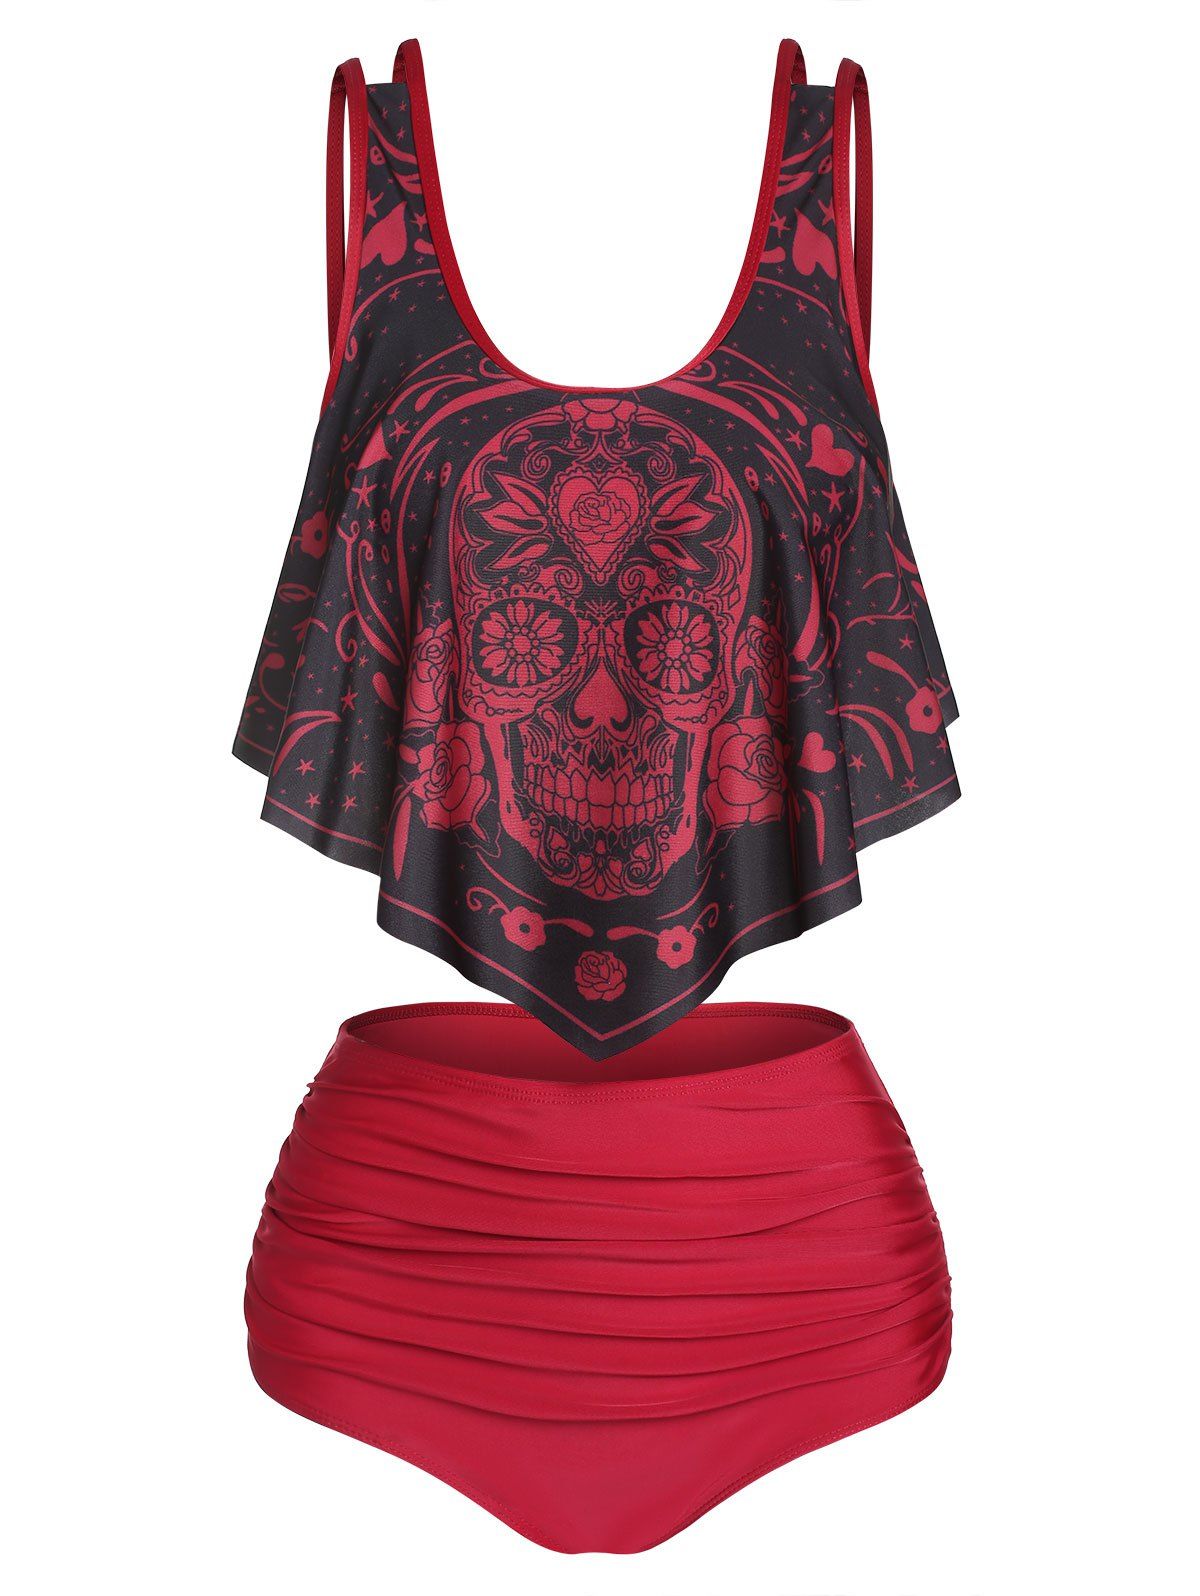 Tummy Control Tankini Swimsuit Gothic Swimwear Skull Print Ruched Full Coverage Beach Bathing Suit - DEEP RED XL